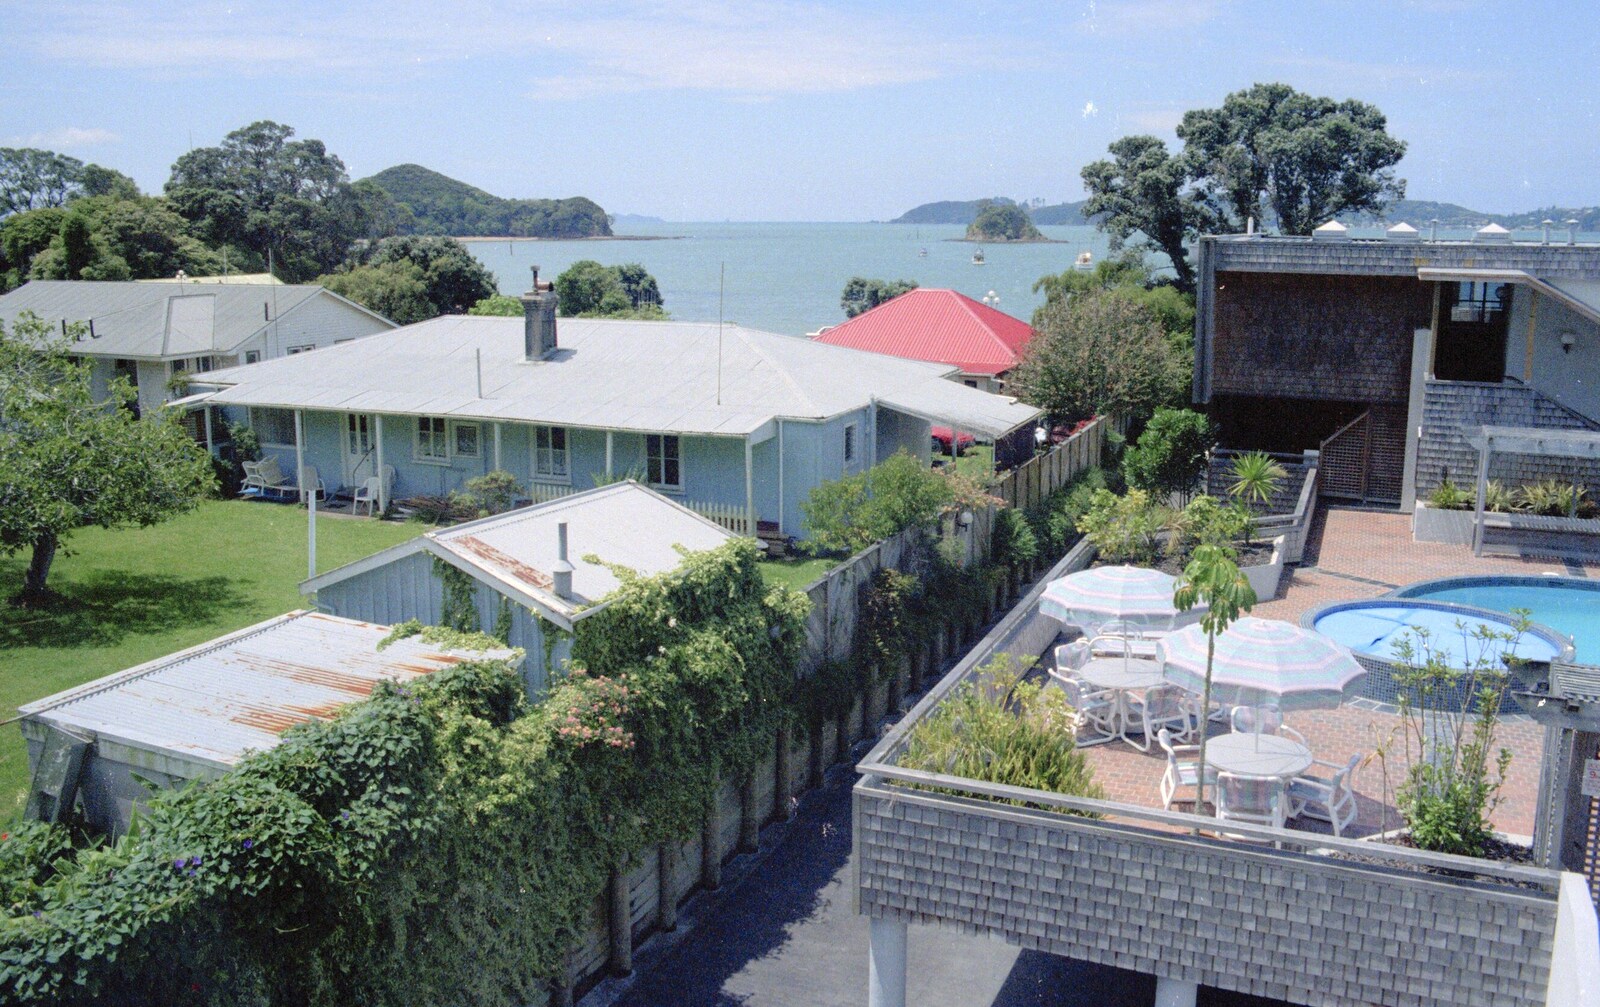 A view from the apartment from The Bay Of Islands, New Zealand - 29th November 1992